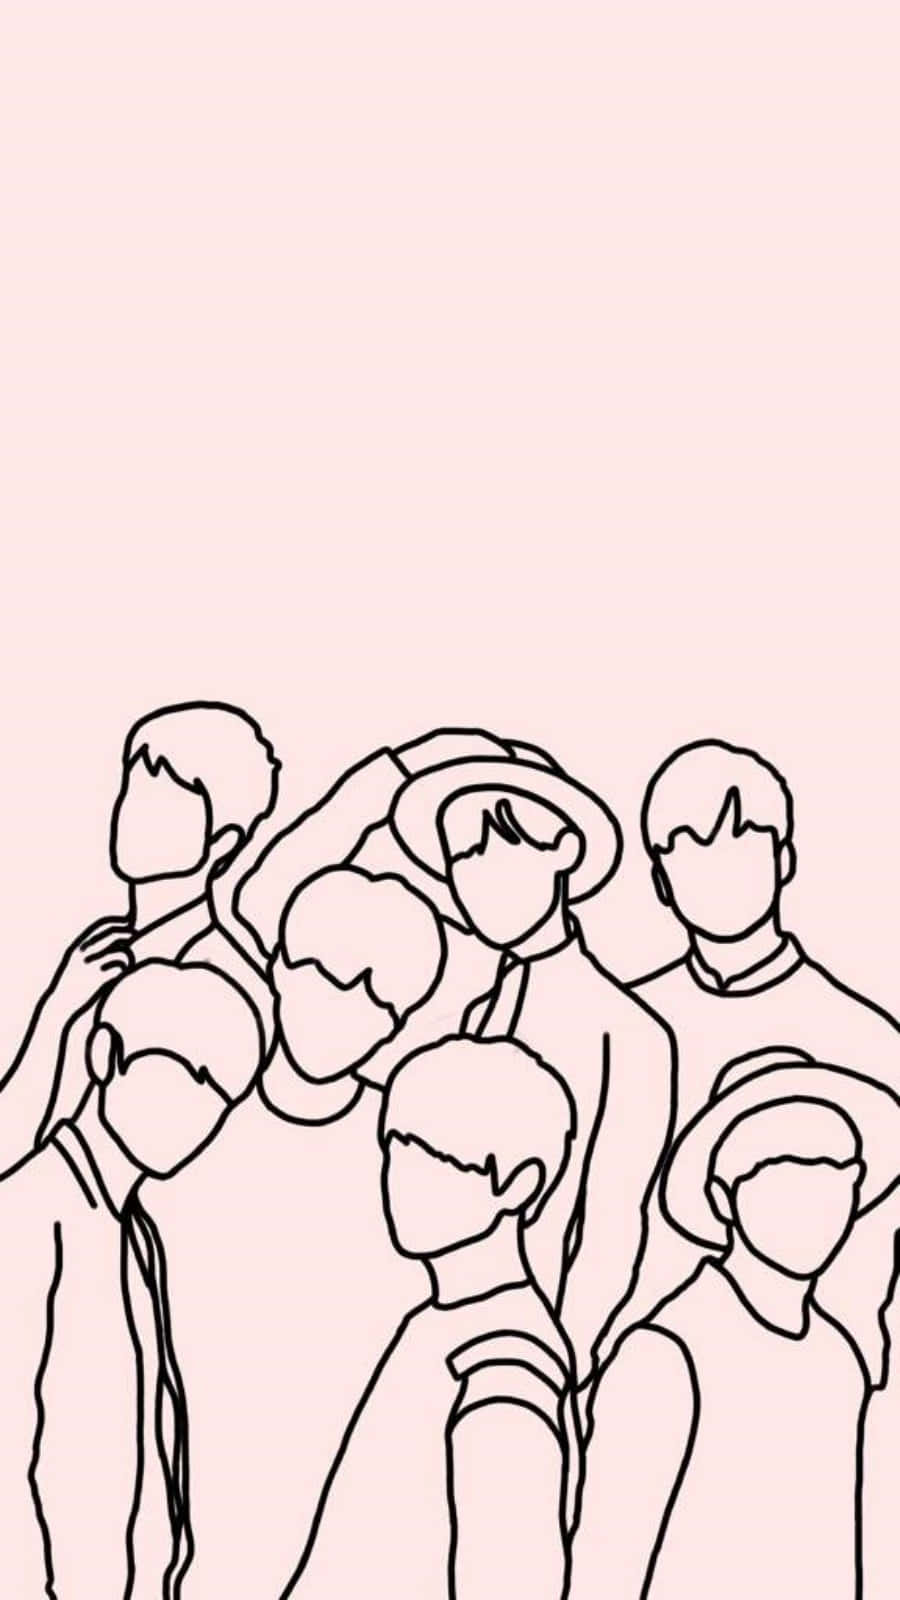 A Drawing Of A Group Of People